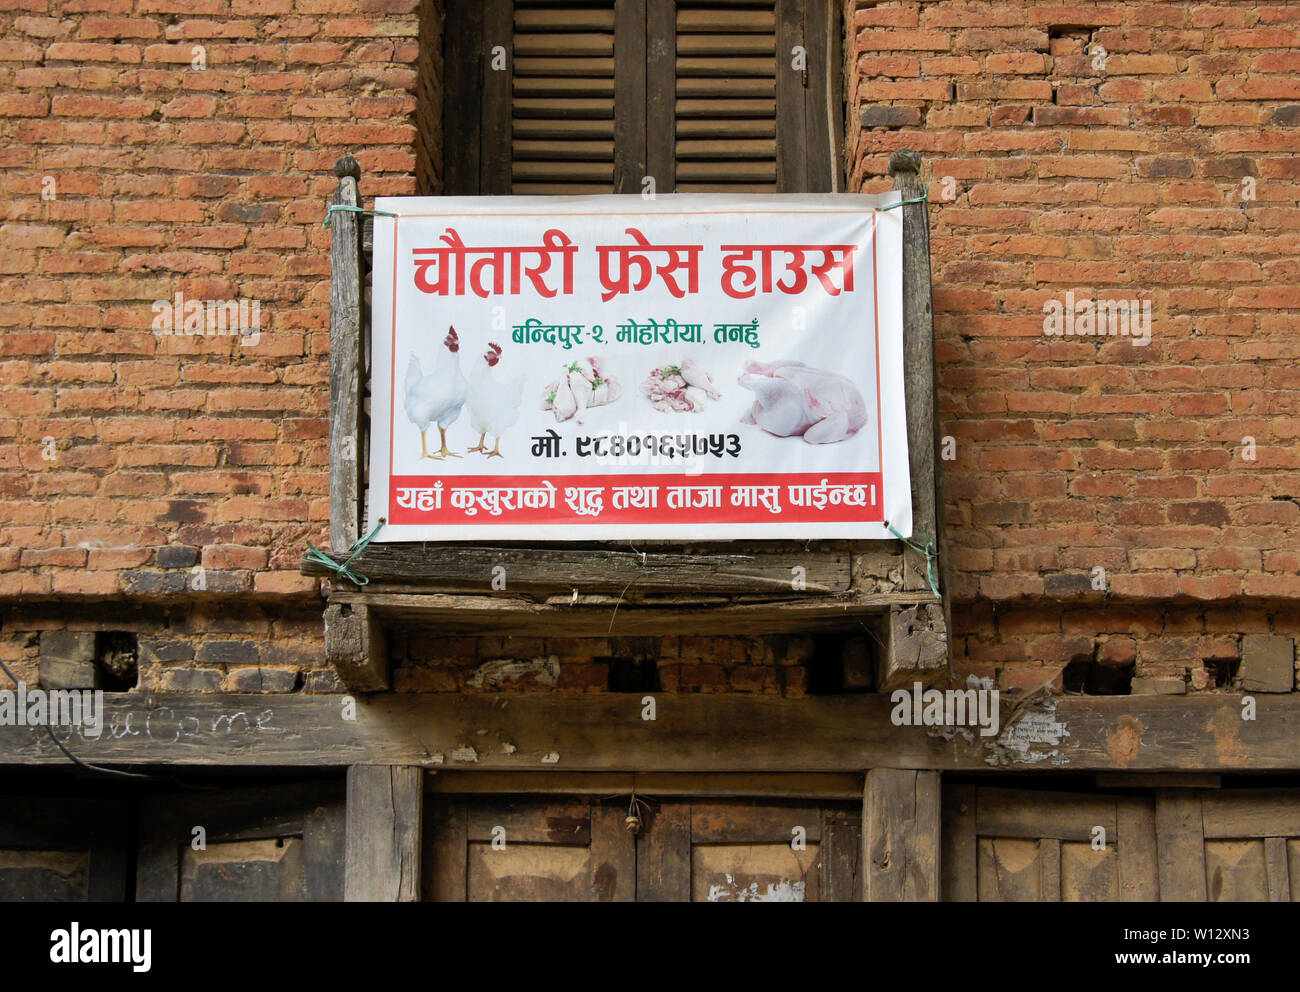 Sign advertising chickens and chicken parts for sale in historic Newari trading post town of Bandipur, Tanahan District, Nepal Stock Photo